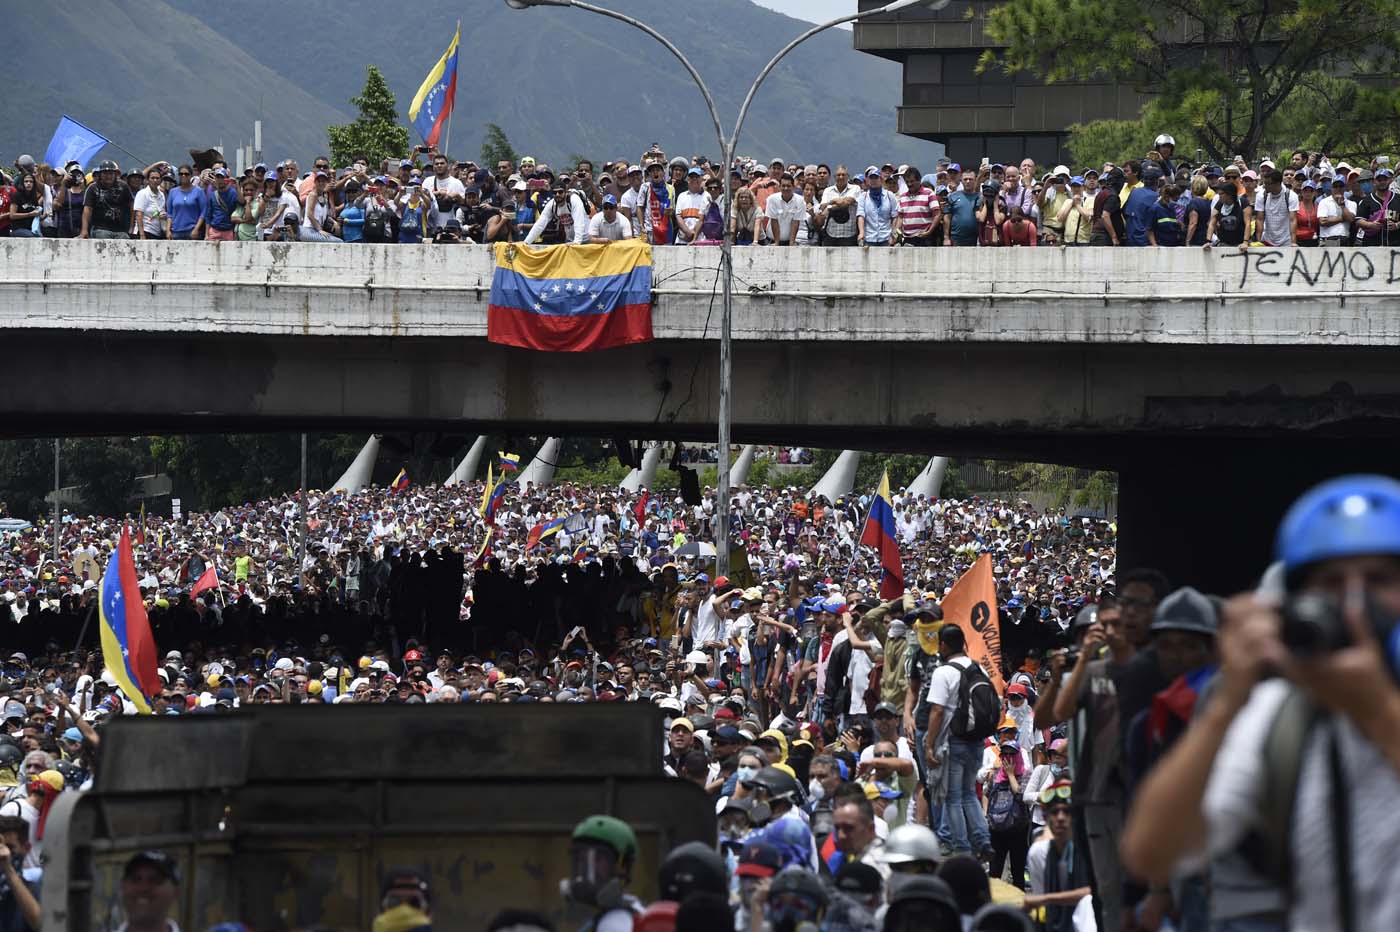 Opposition activists march during a protest against Venezuelan President Nicolas Maduro, in Caracas on May 3, 2017. Venezuela's angry opposition rallied Wednesday vowing huge street protests against President Nicolas Maduro's plan to rewrite the constitution and accusing him of dodging elections to cling to power despite deadly unrest. / AFP PHOTO / JUAN BARRETO